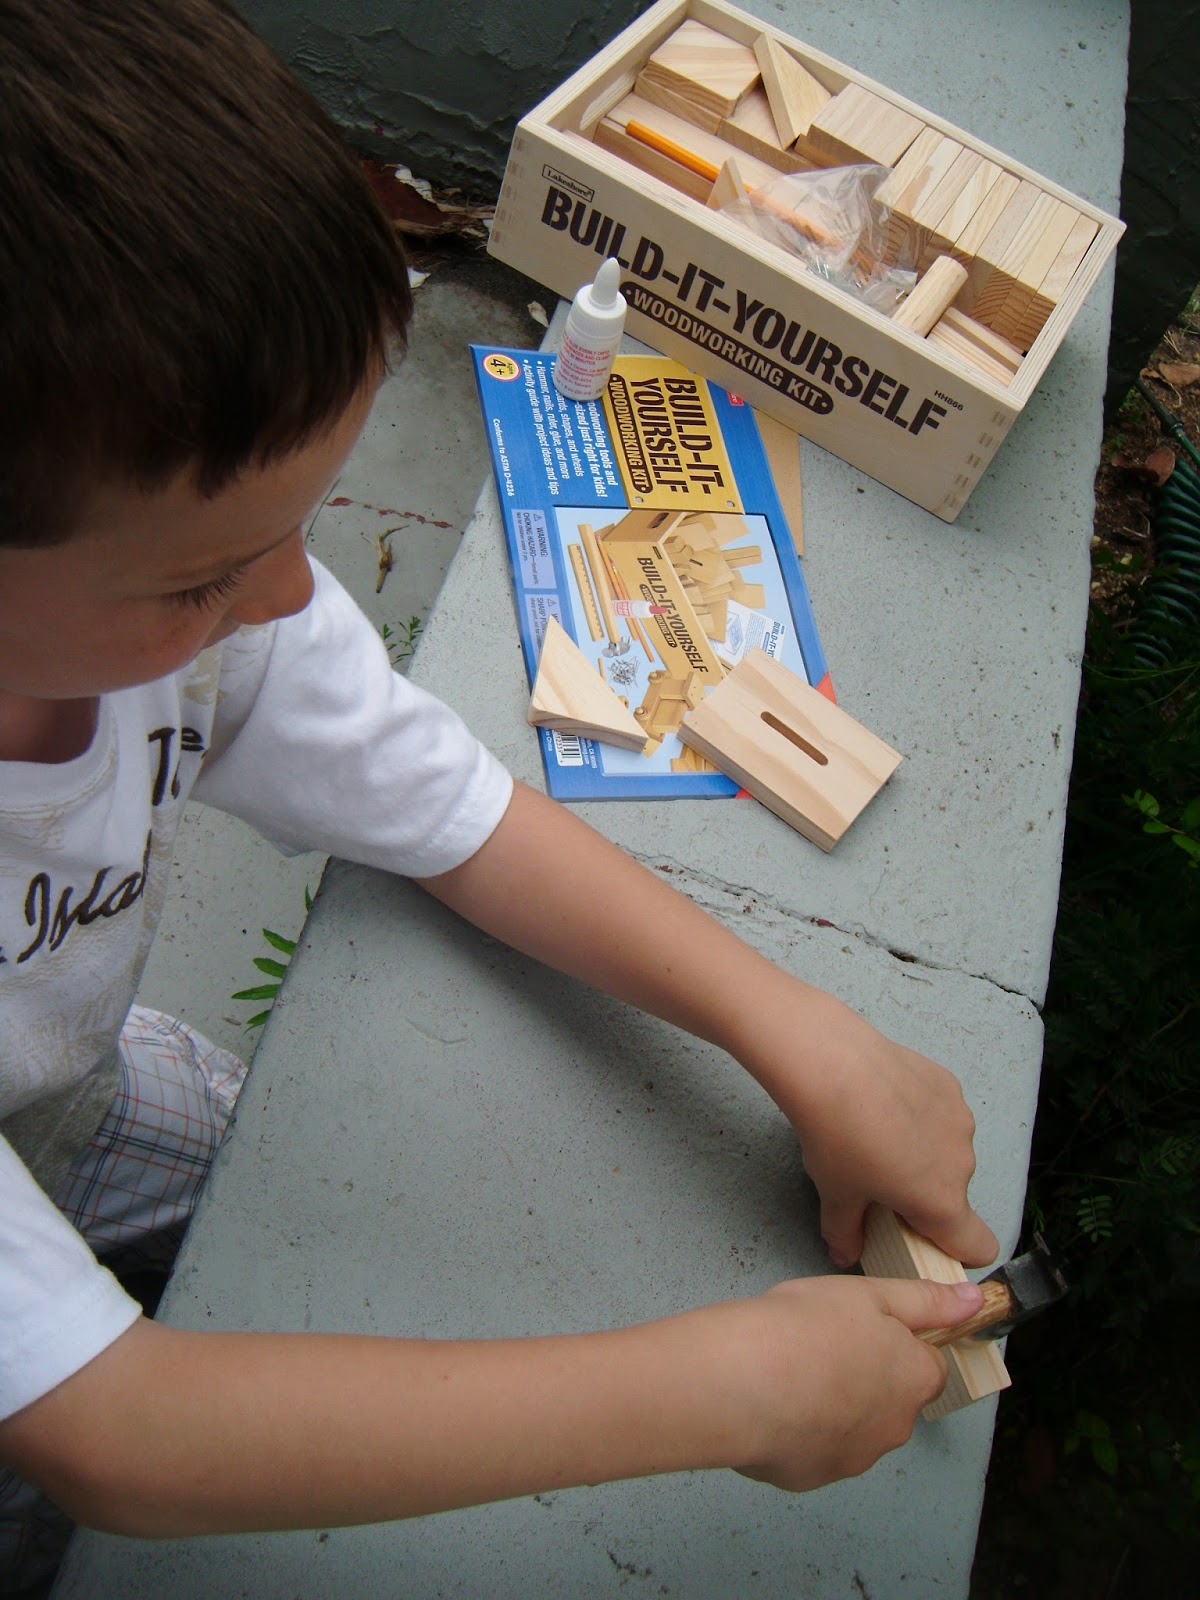 Build-It-Yourself Woodworking Kit at Lakeshore Learning  Woodworking kits,  Woodworking kit for kids, Woodworking for kids